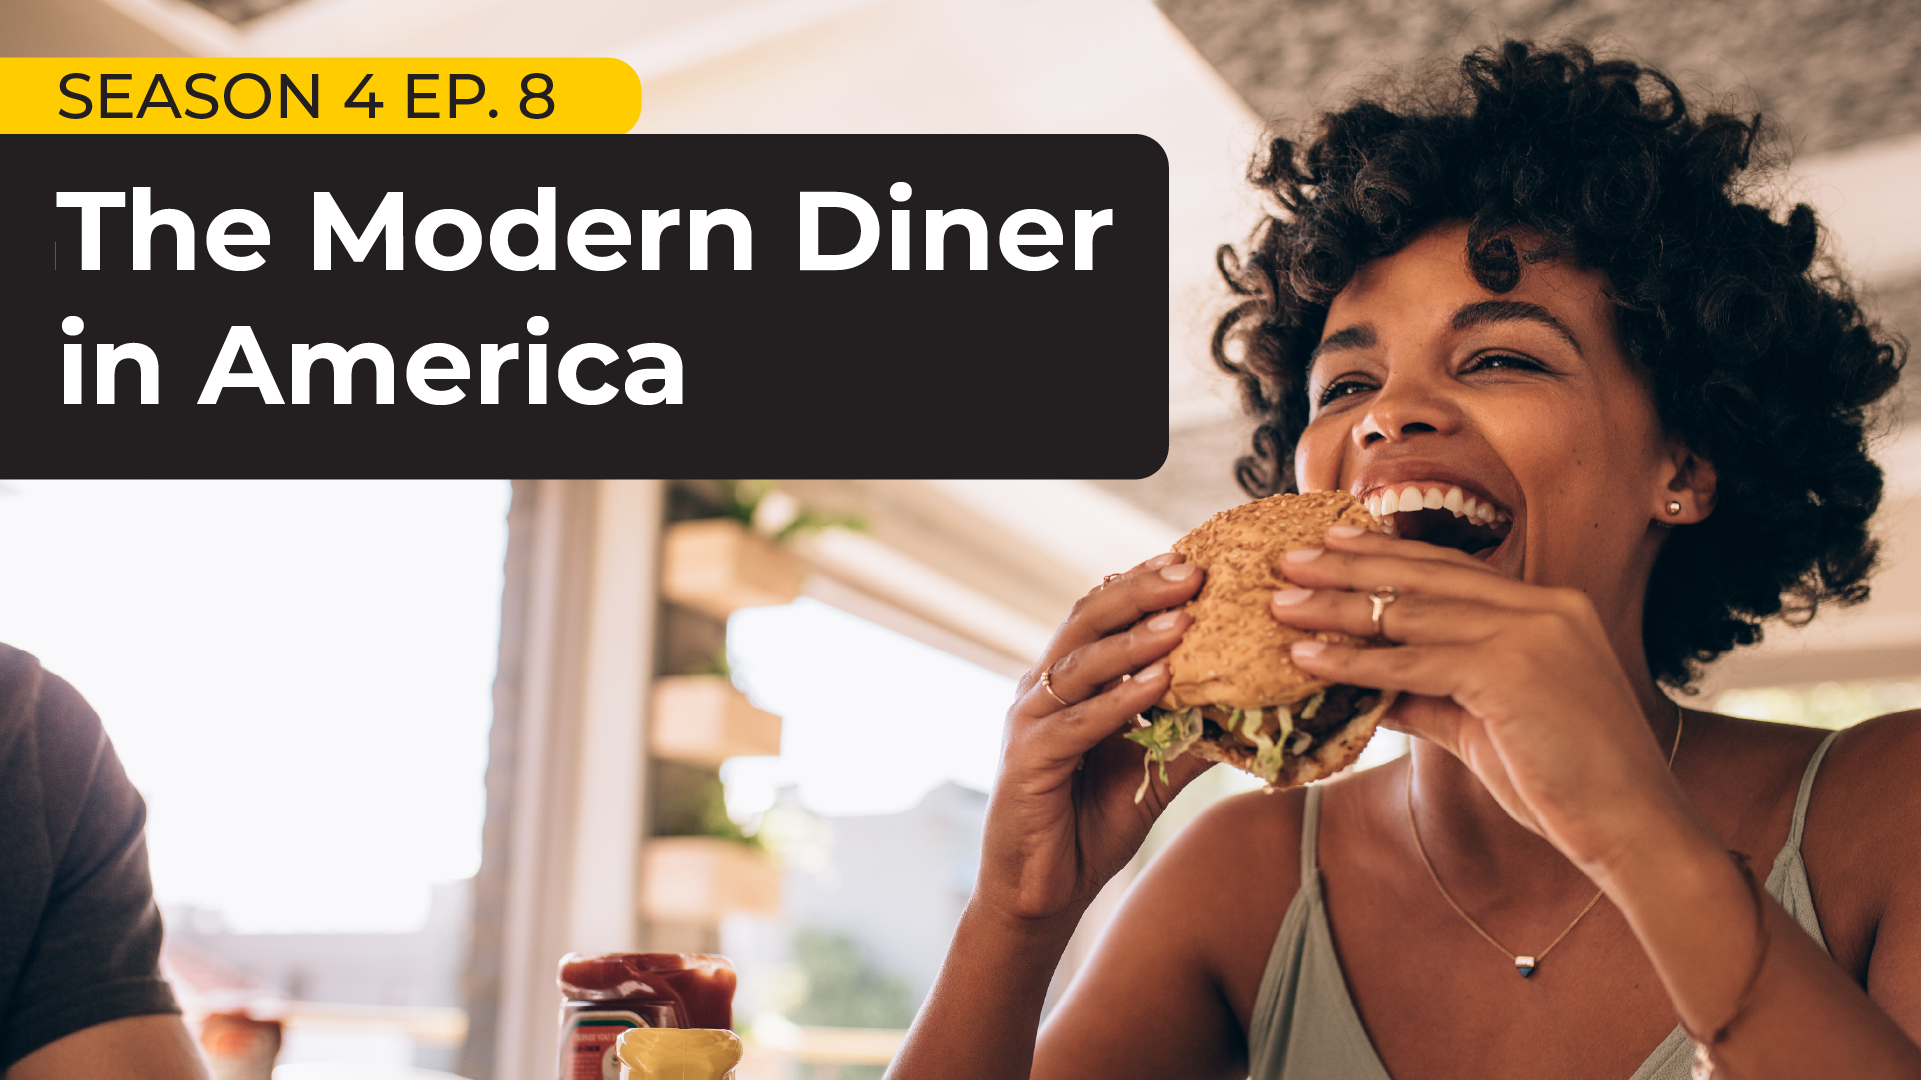 Datassential team Colleen McClellan, Mike Kostyo, Gerald Oksanen, and Claire Conaghan discuss how American consumers' eating habits have changed both at home and away from home and the latest food trends around Easter and Mother's Day